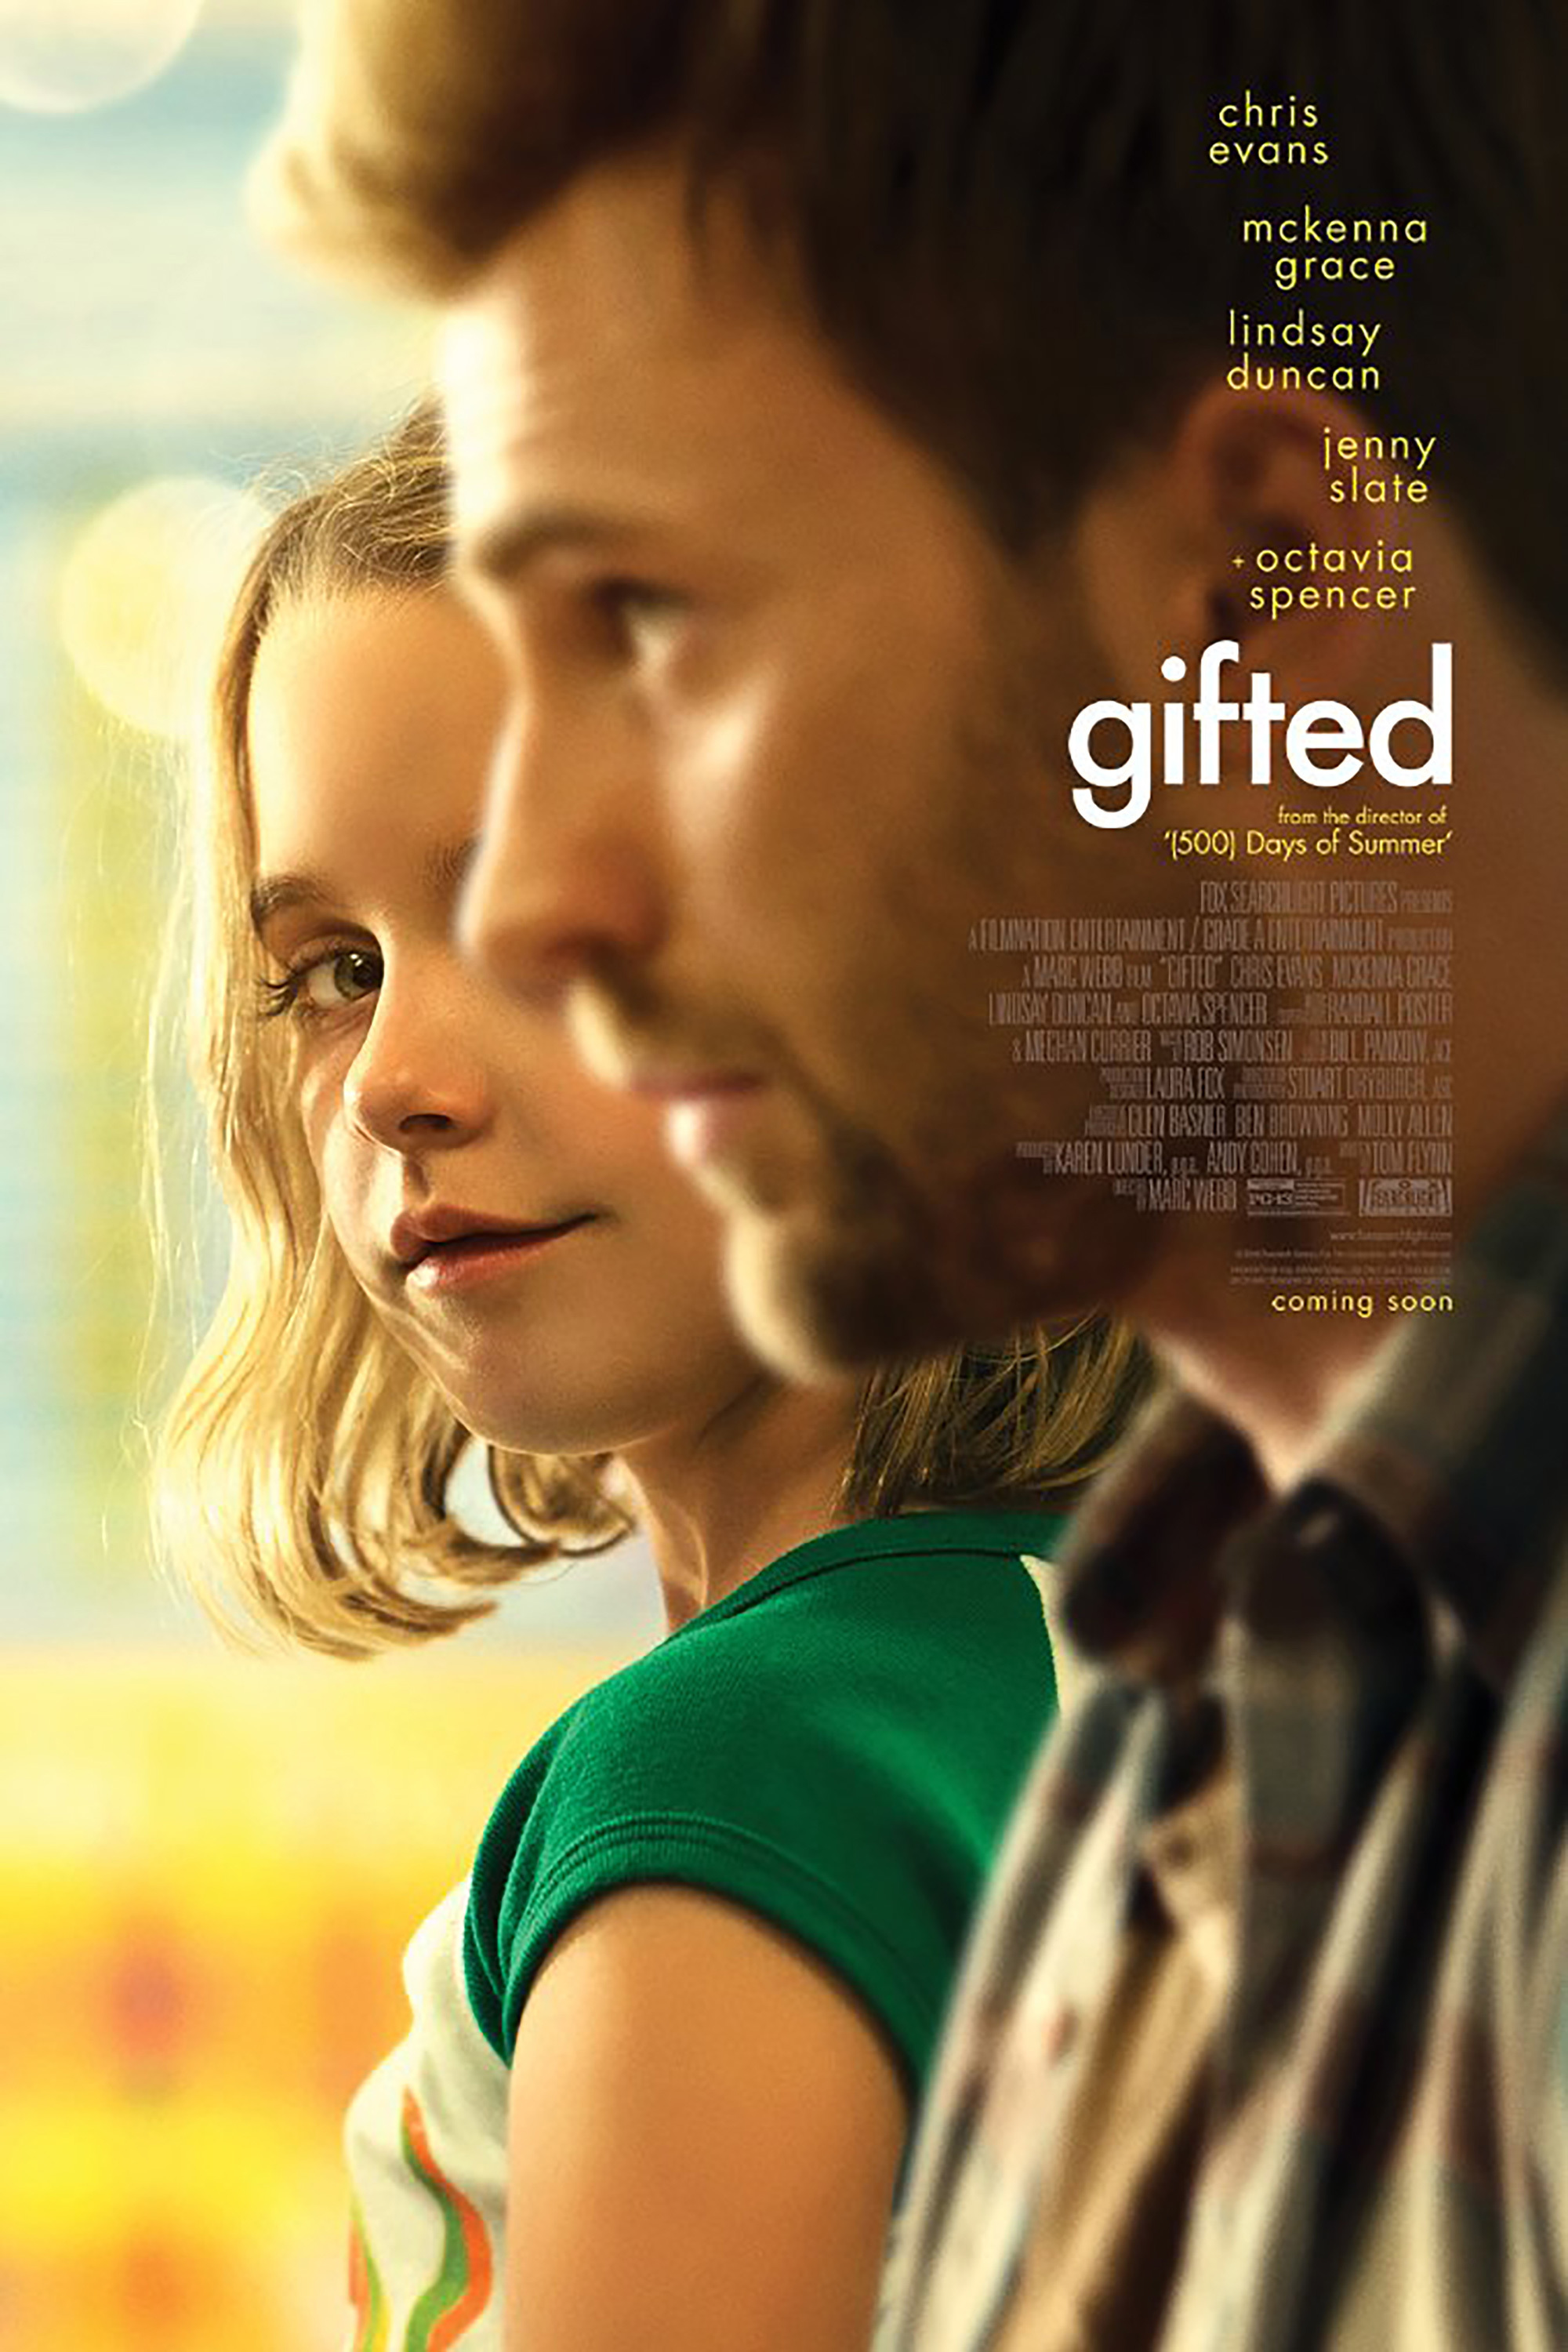 392-gifted_movie_poster.jpg